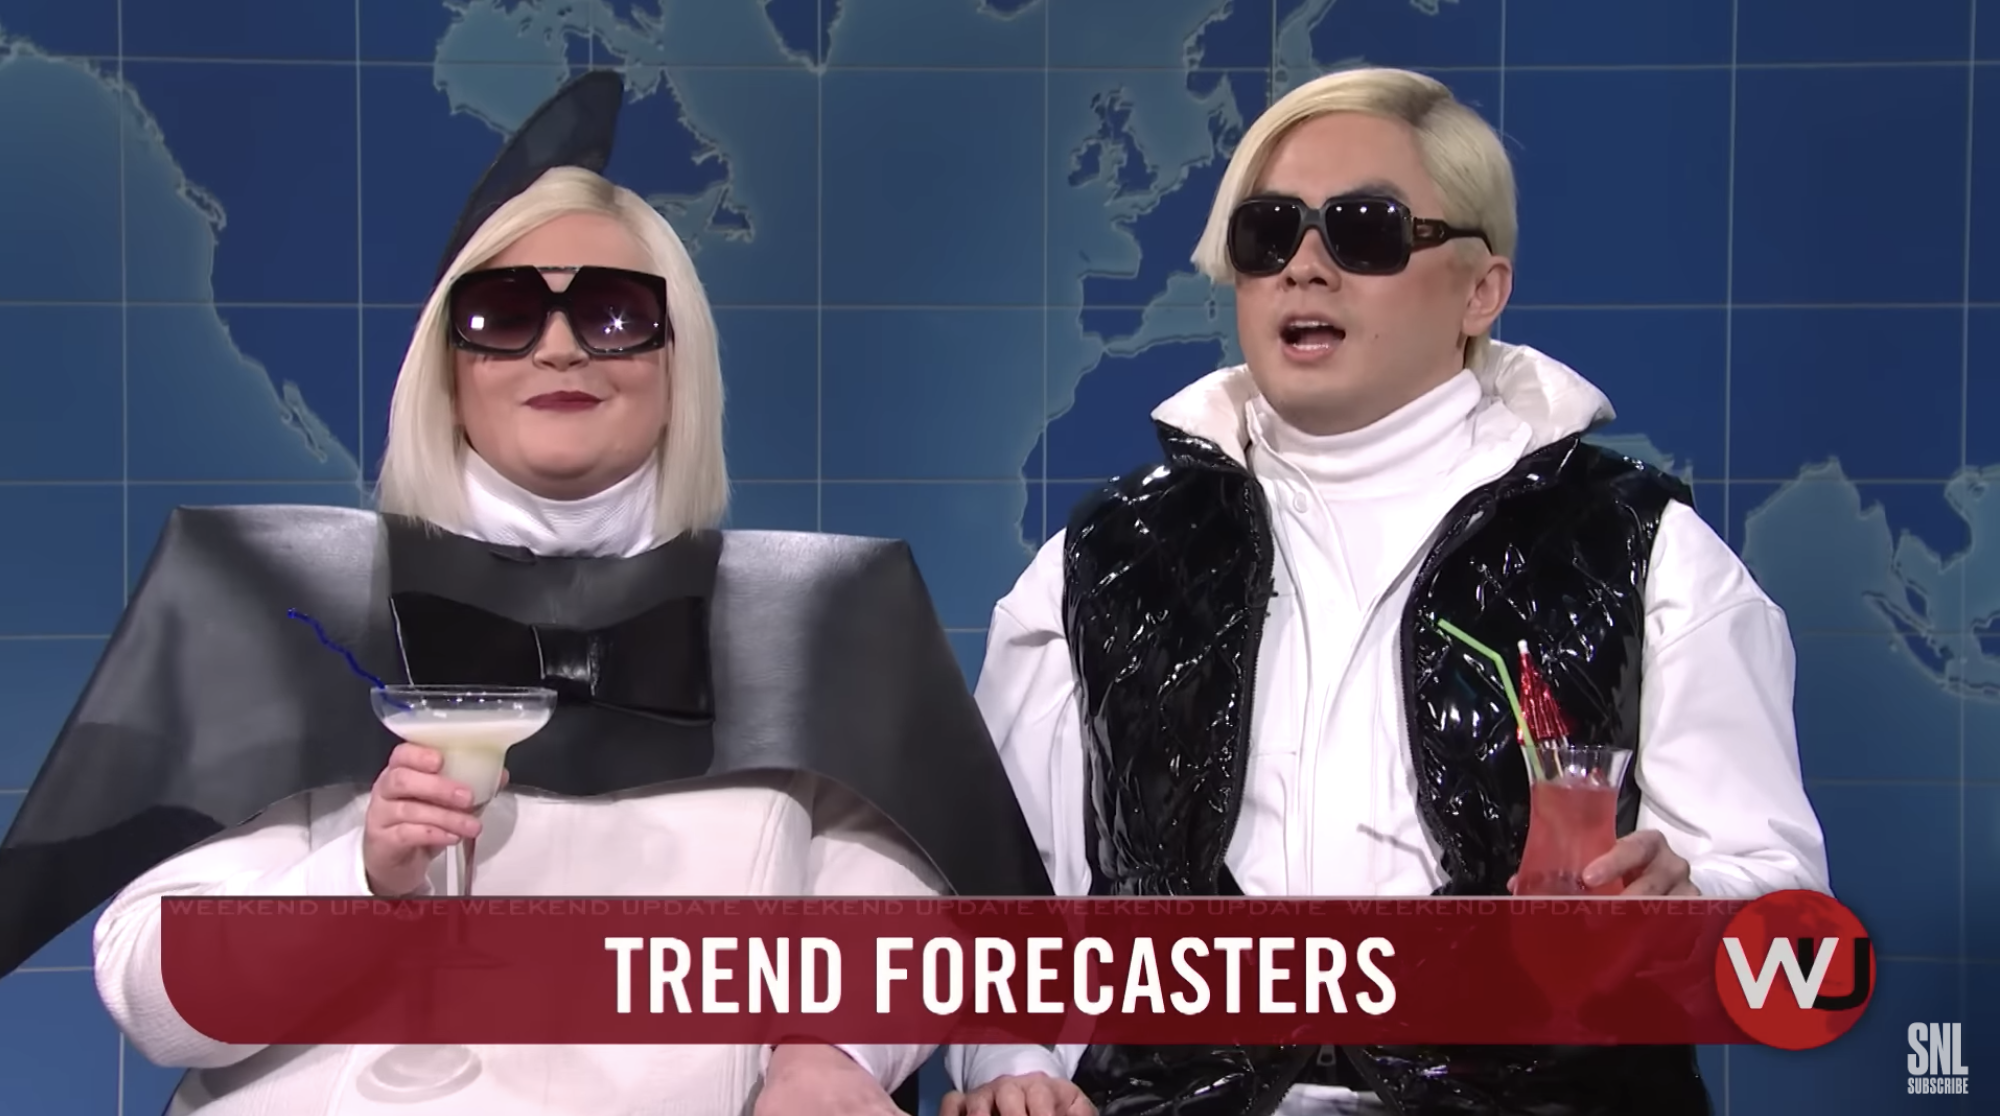 Aidy Bryant and Bowen Yang as Trend Forecasters on &quot;SNL&quot;